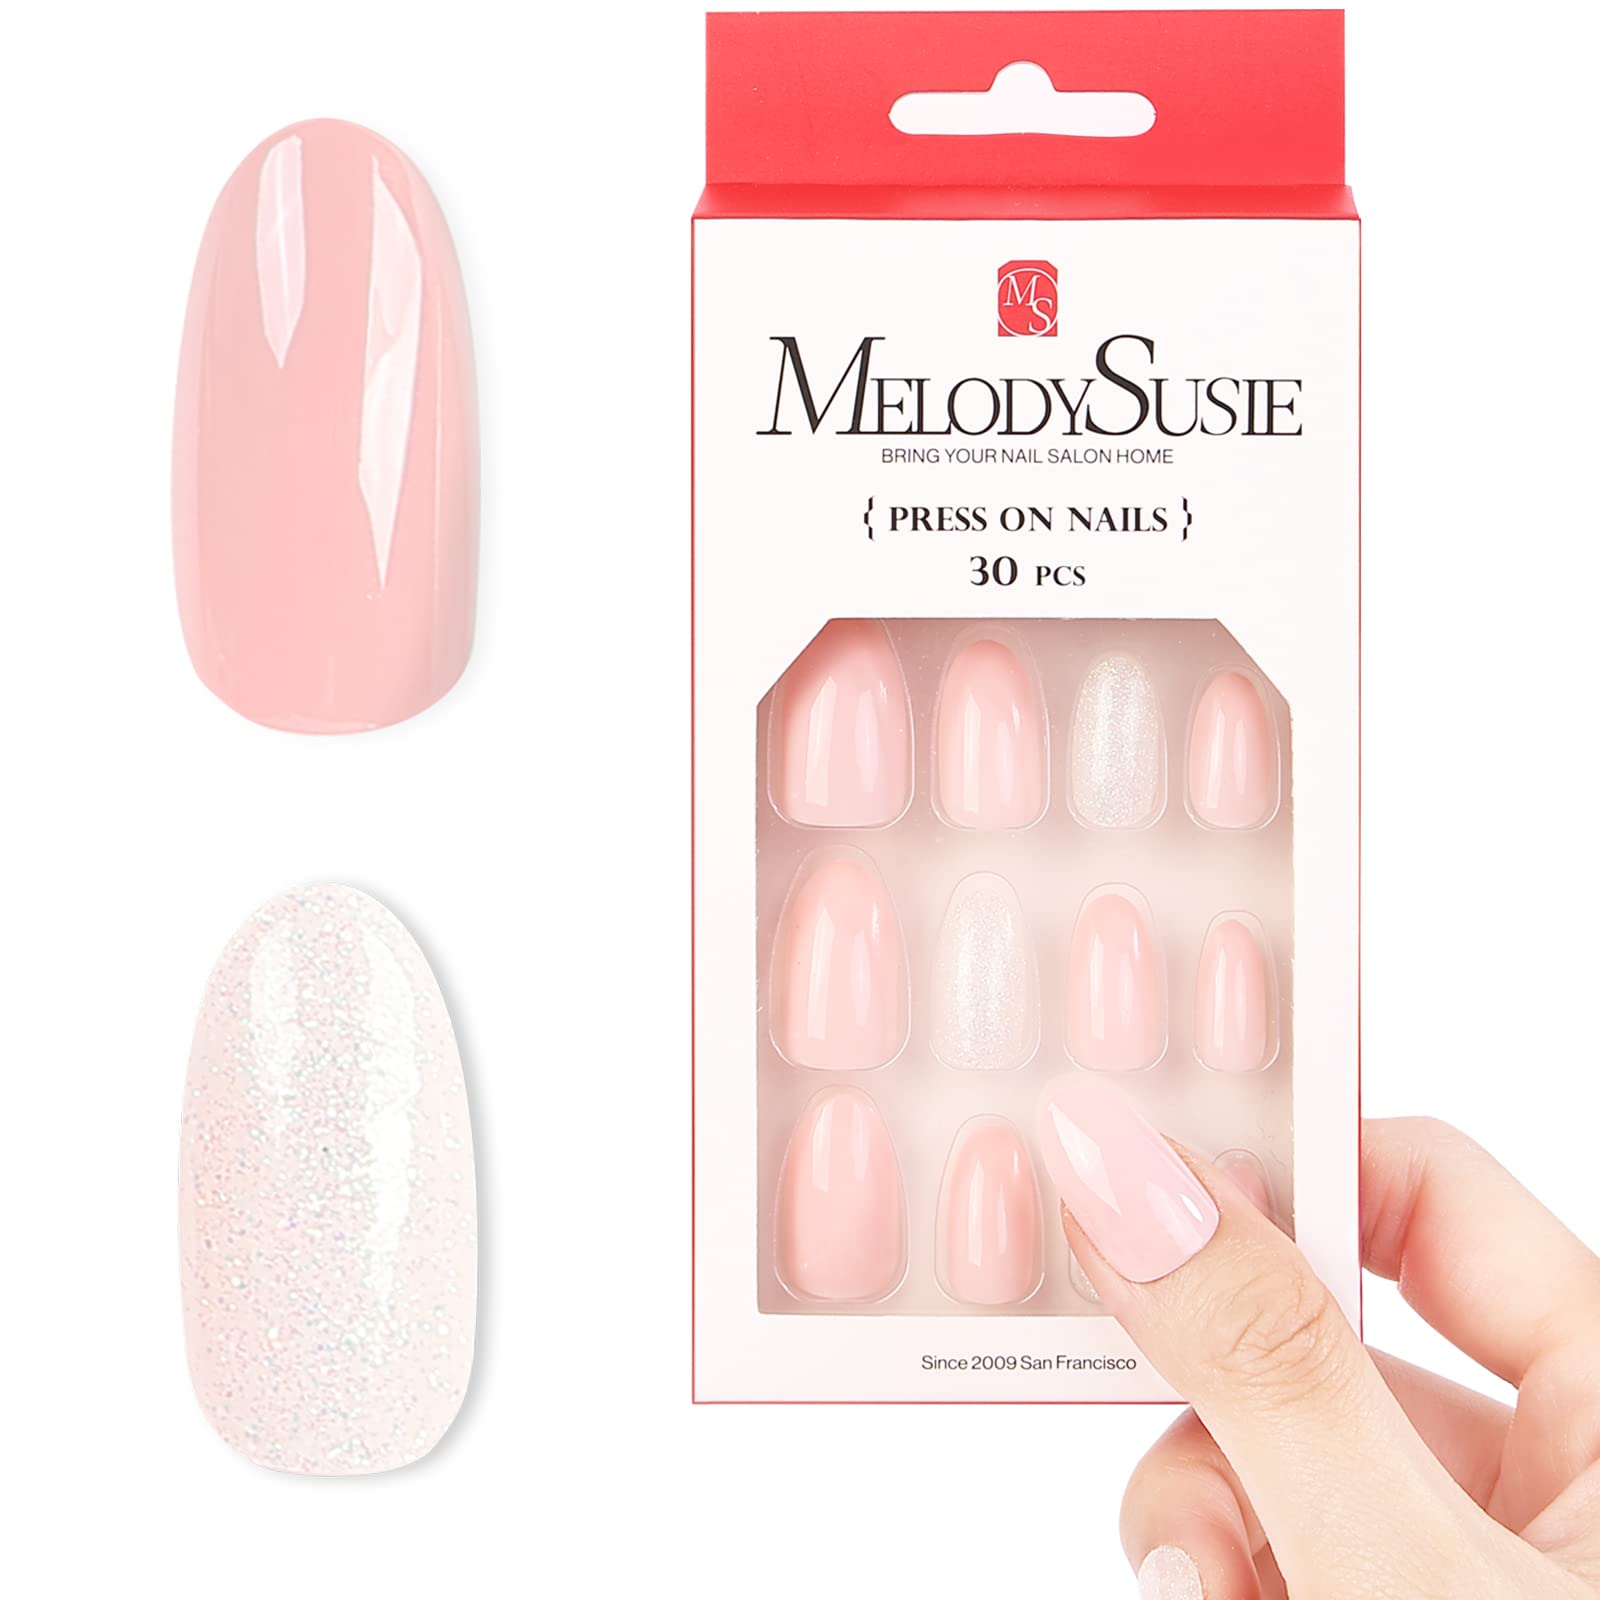 KISS Jelly Fantasy Sculpted Translucent Fake Nails, 'Cherry Jelly', 28  Count - Walmart.com